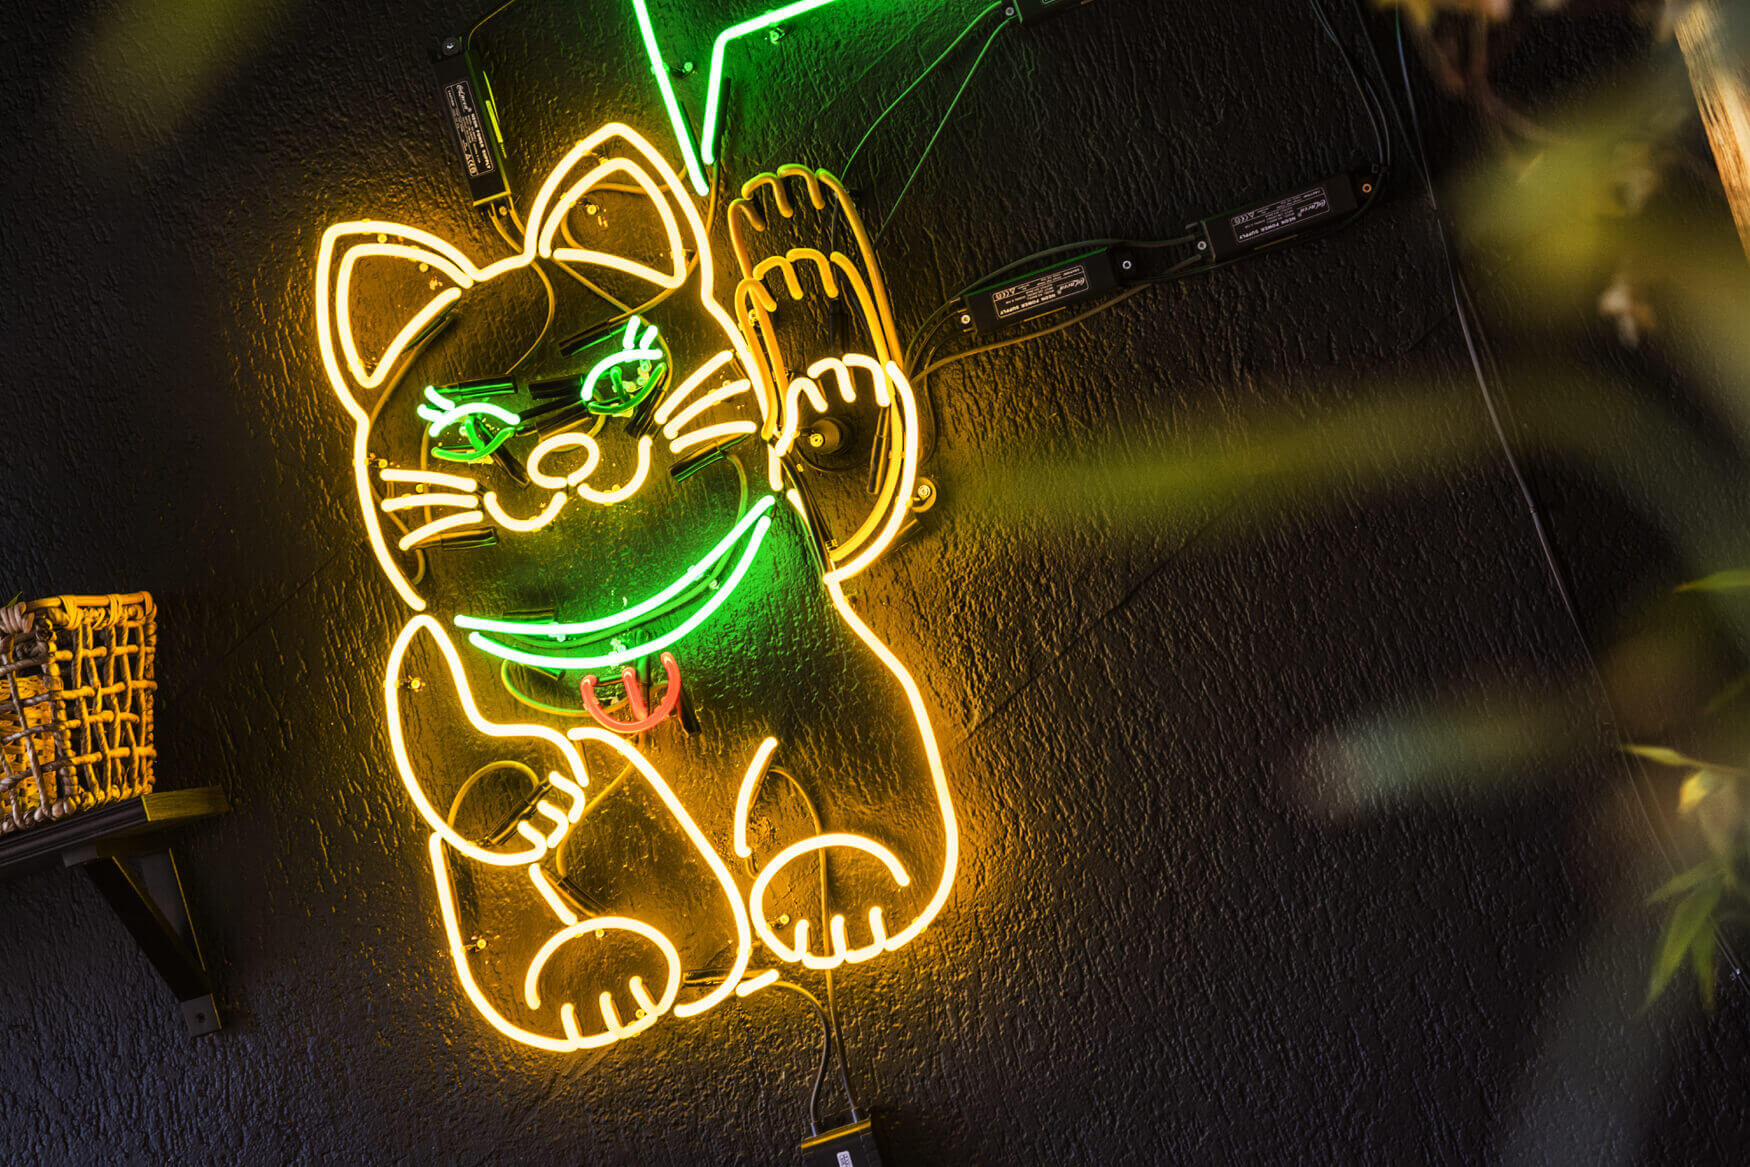 Kitty - neon-chinese-cat-from-neon-neon-winking-neon-neon-with-interrupter-neon-controller-motion-neon-cat-from-neon-neon-on-the-wall-interior-restaurant-gdansk